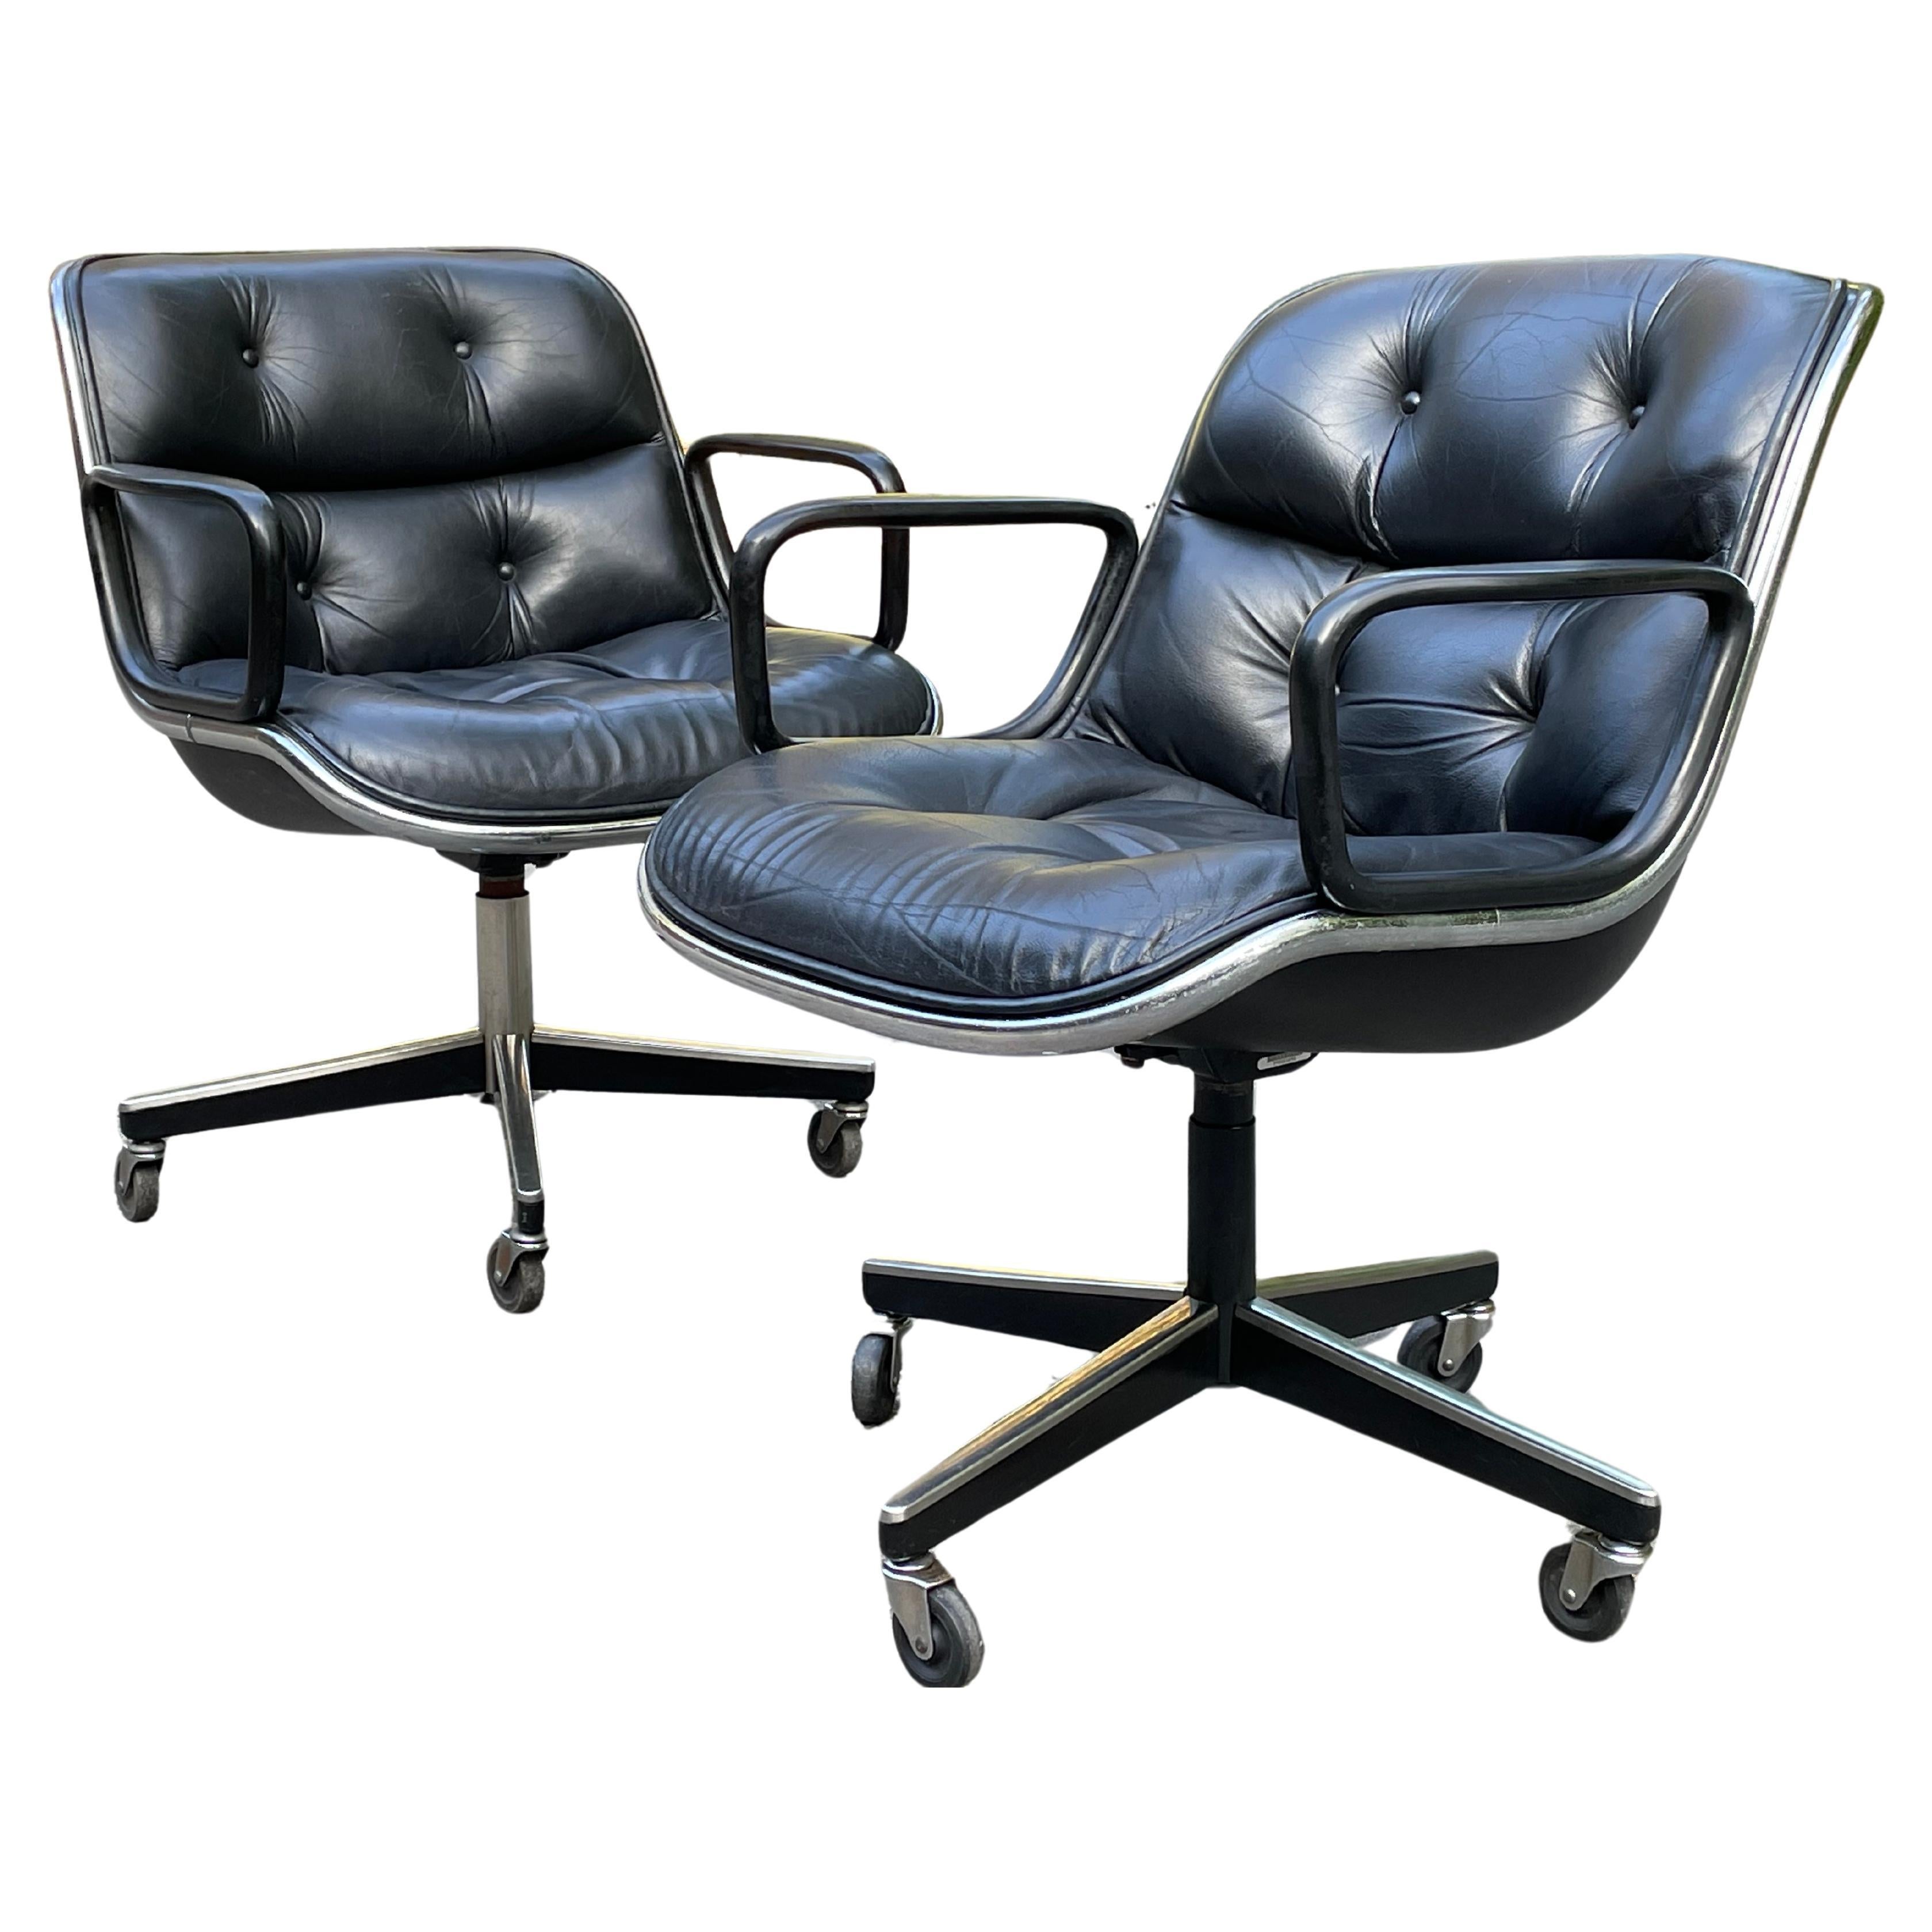 Vintage Knoll Pollock Chairs in Black Leather - Pair